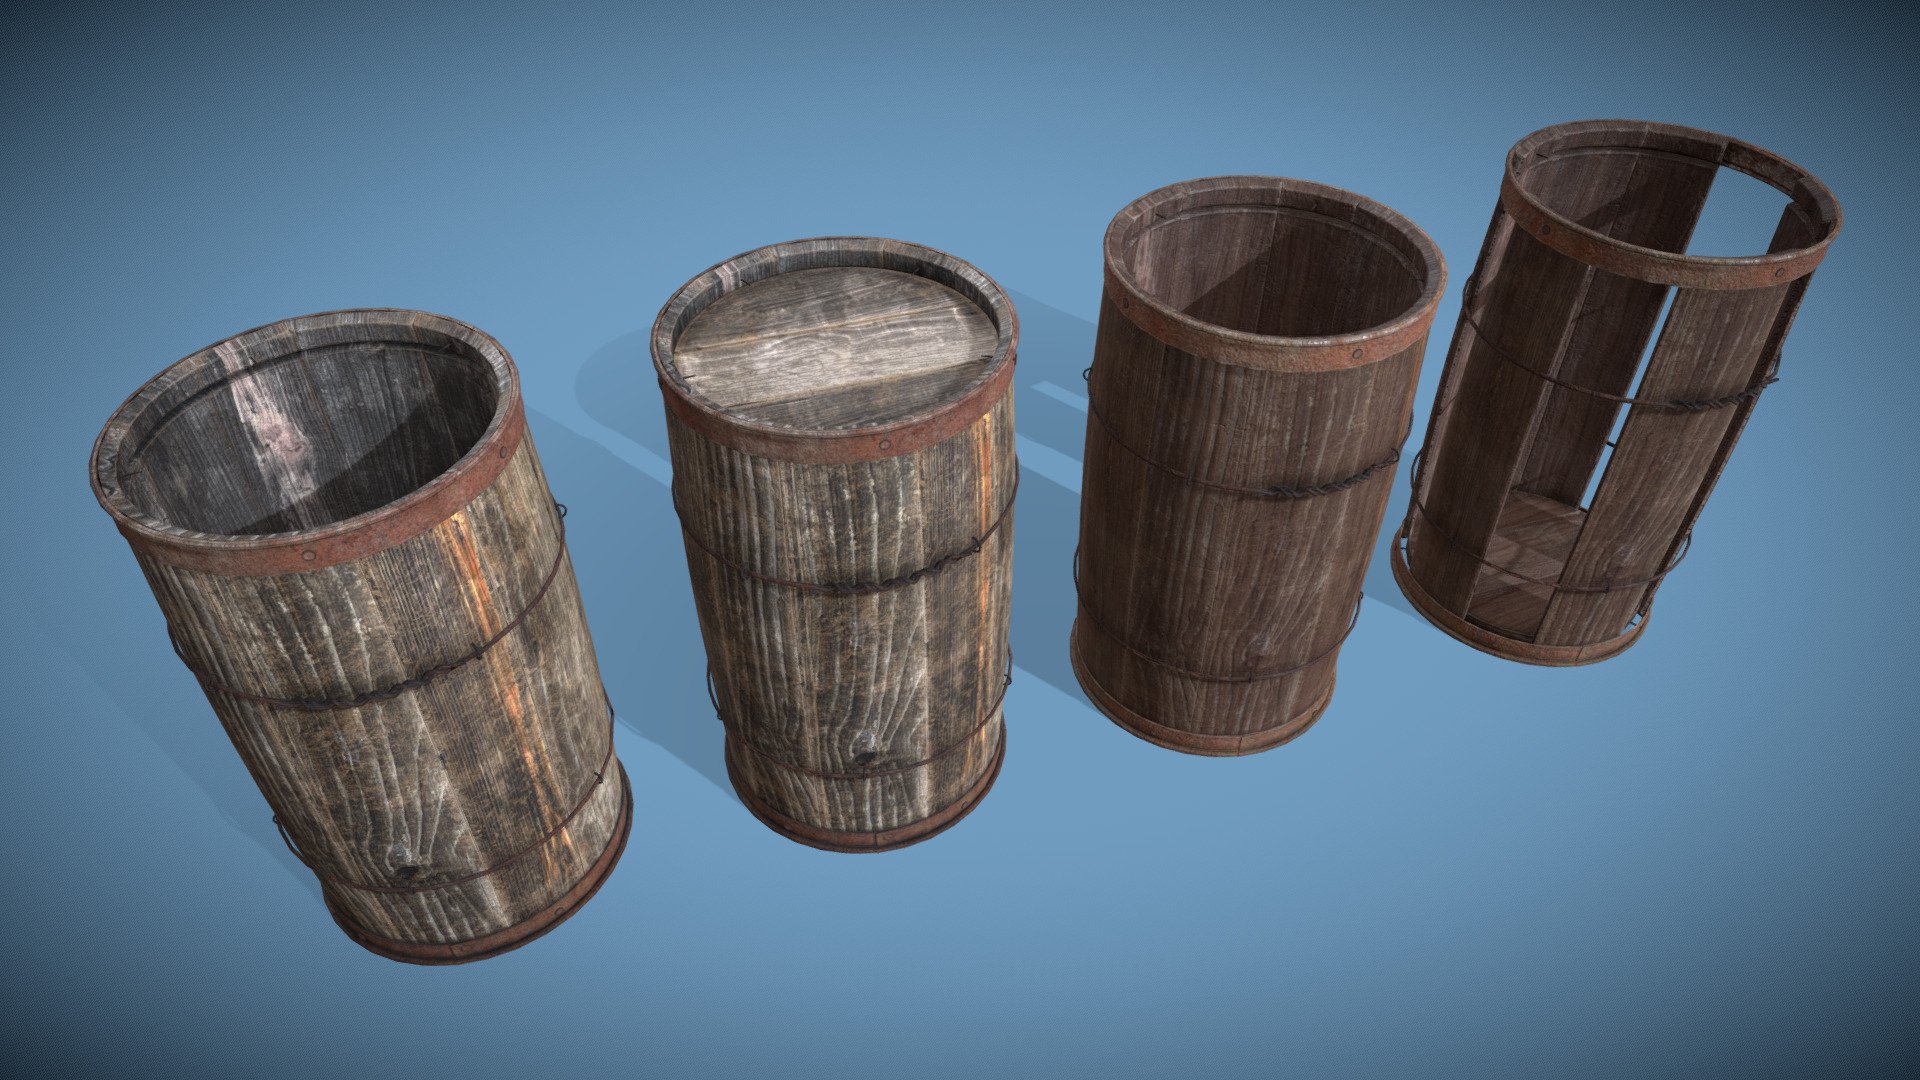 Crudely constructed Nail Barrels - not watertight, so only good for transporting solid materials 3d model